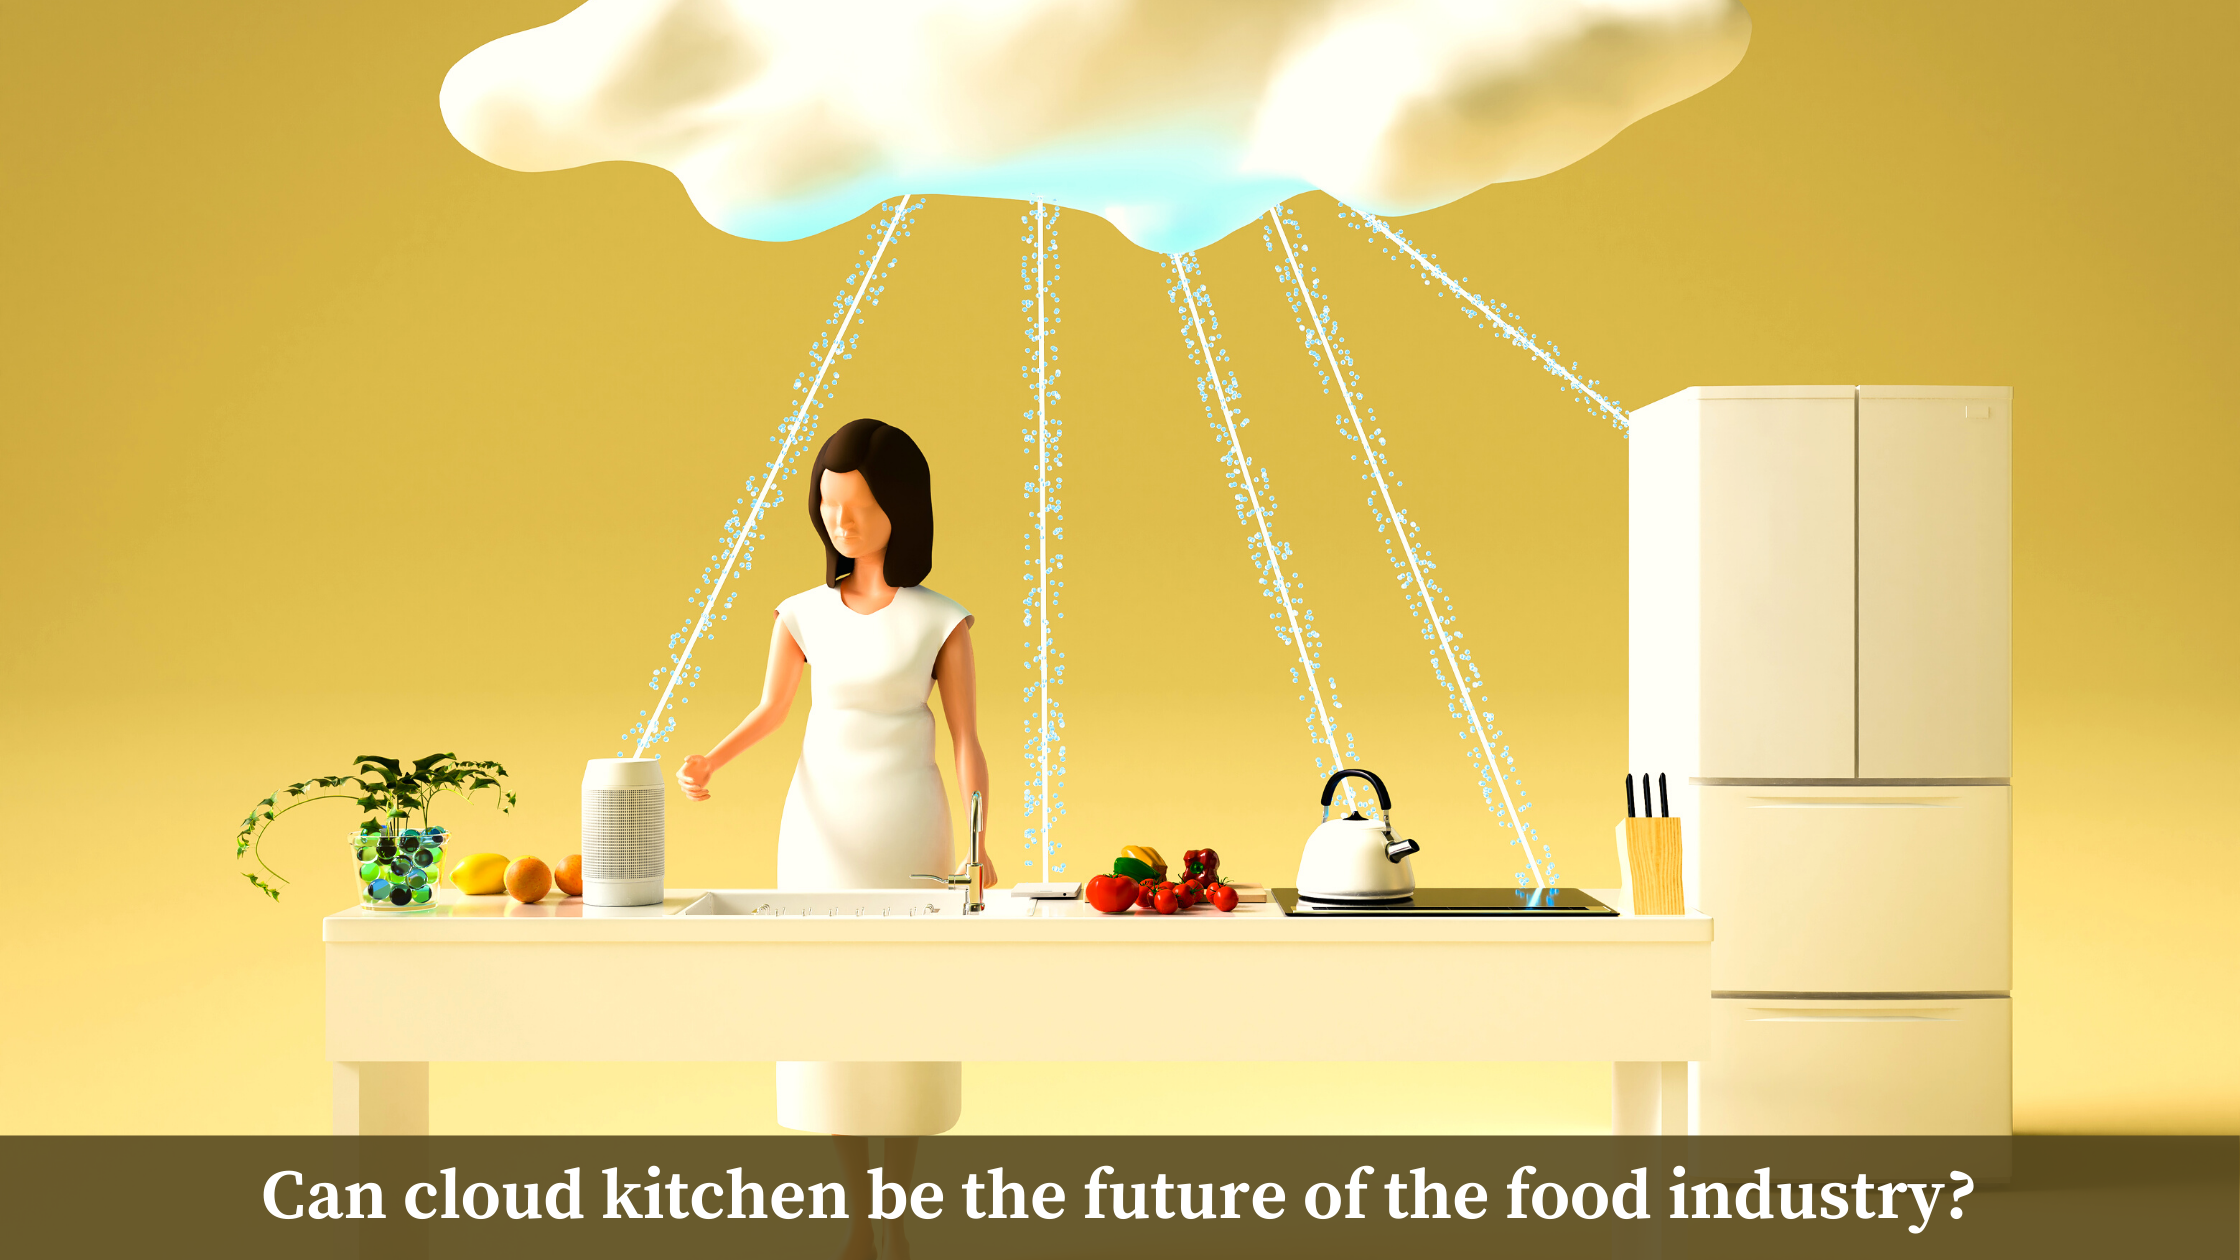 Can cloud kitchen be the future of the food industry?